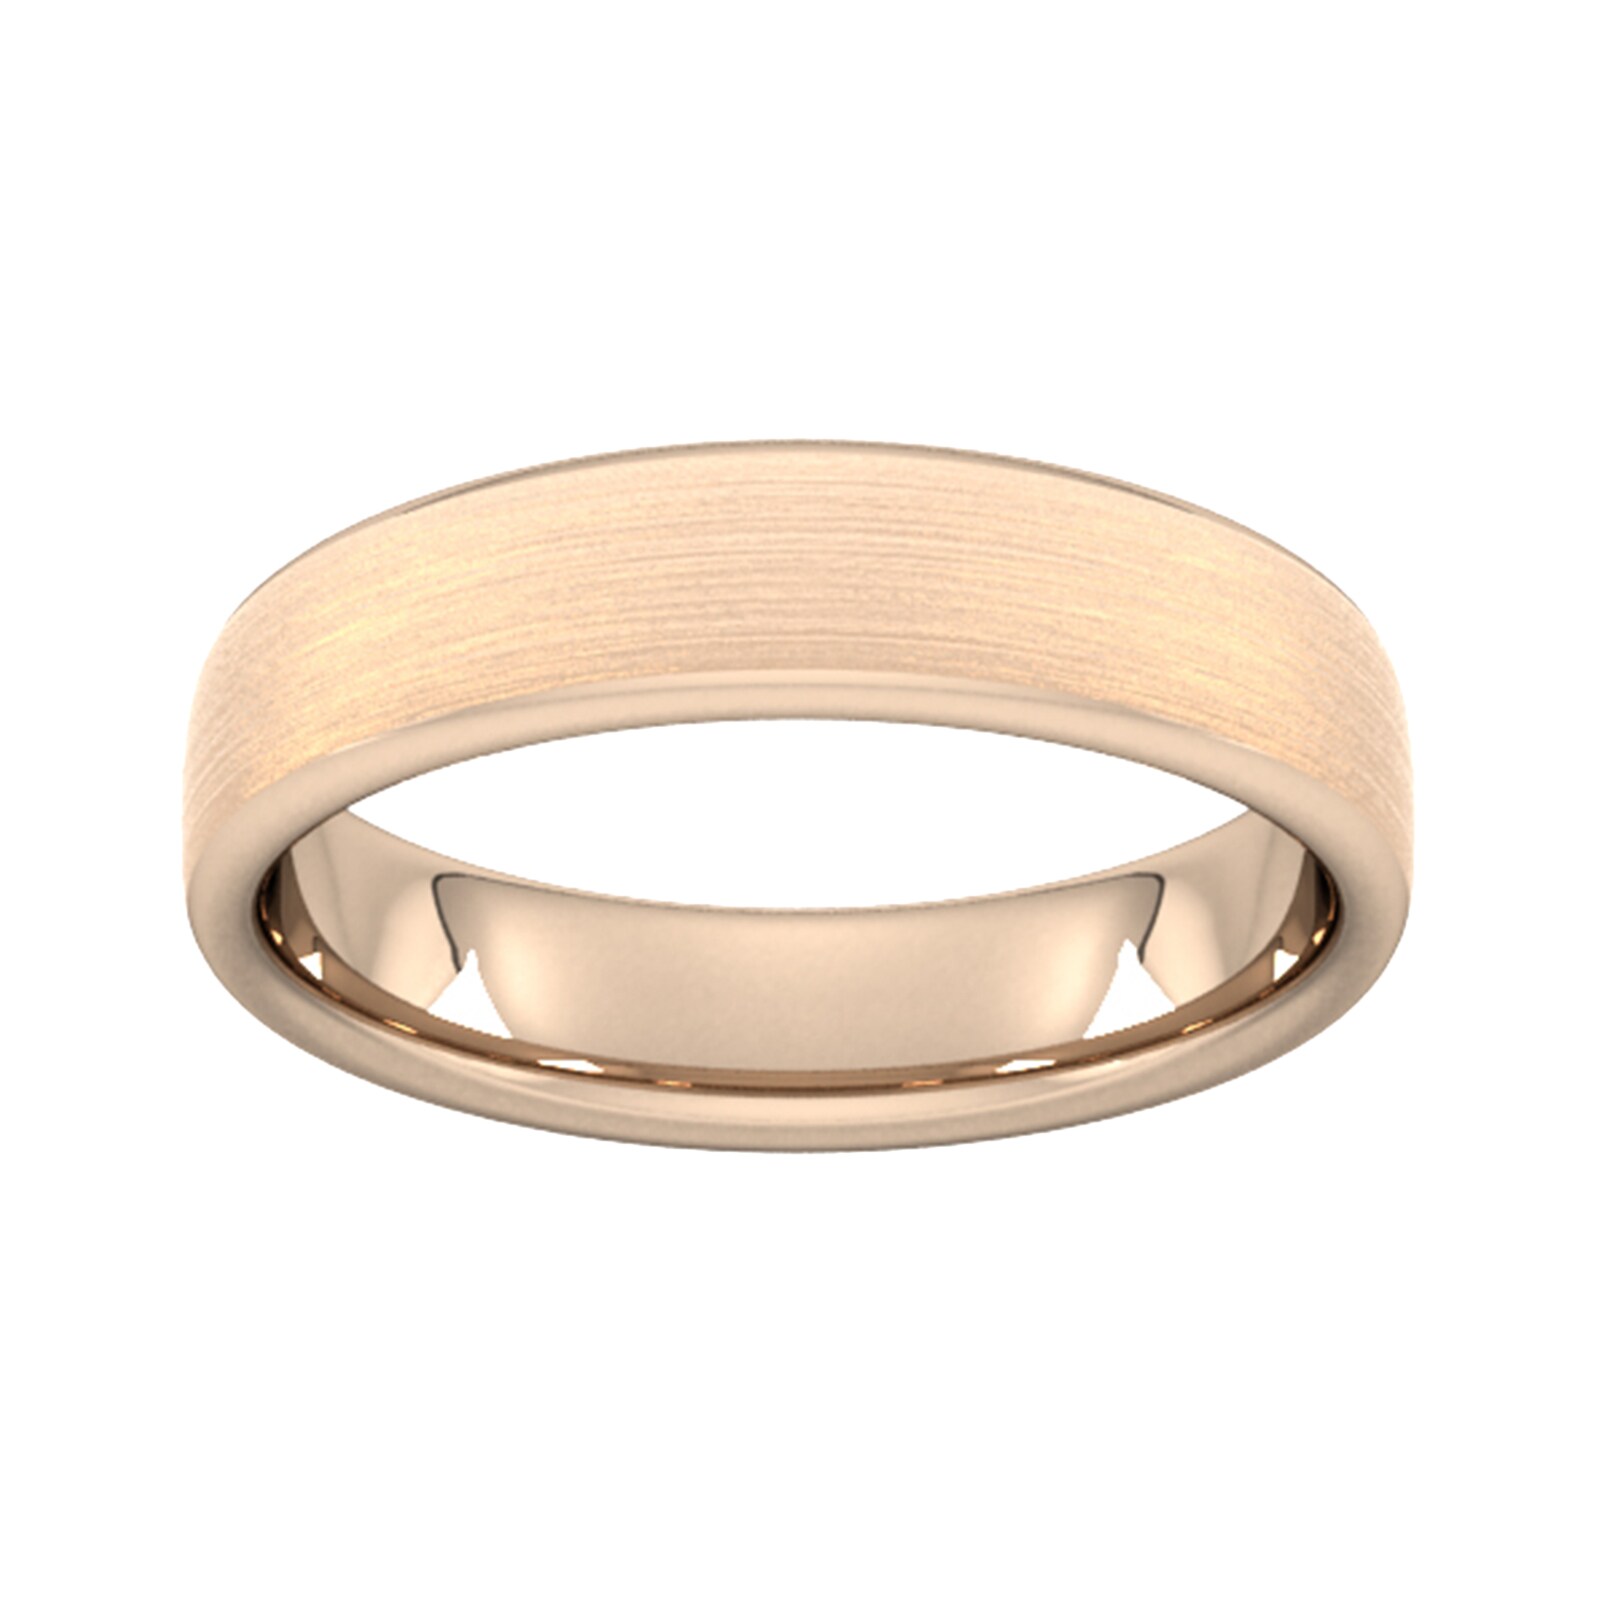 5mm d shape heavy matt finished wedding ring in 18 carat rose gold - ring size t